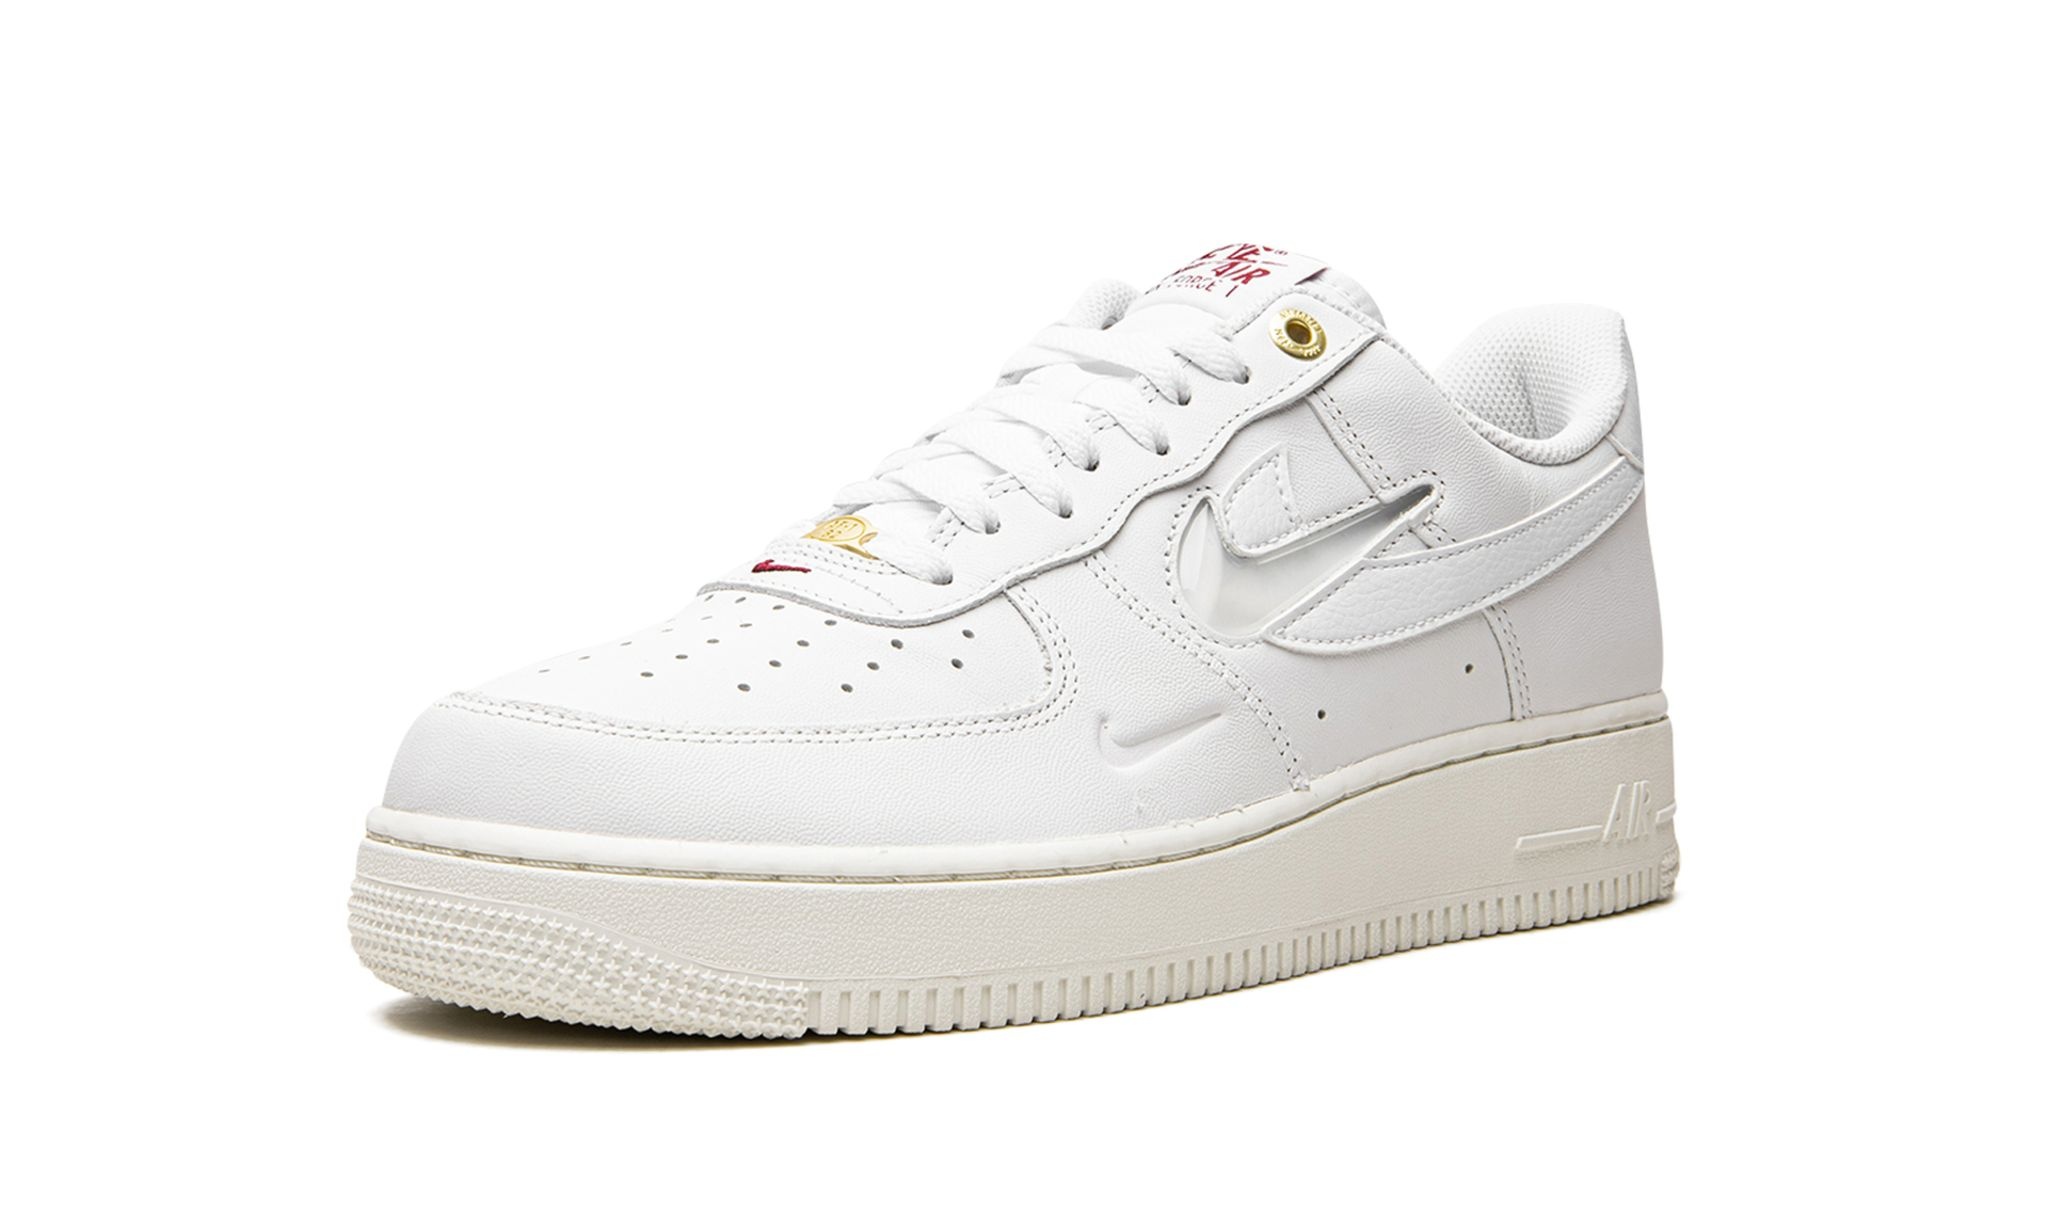 Air Force 1 Low '07 LV8 "Join Forces Sail" - 4